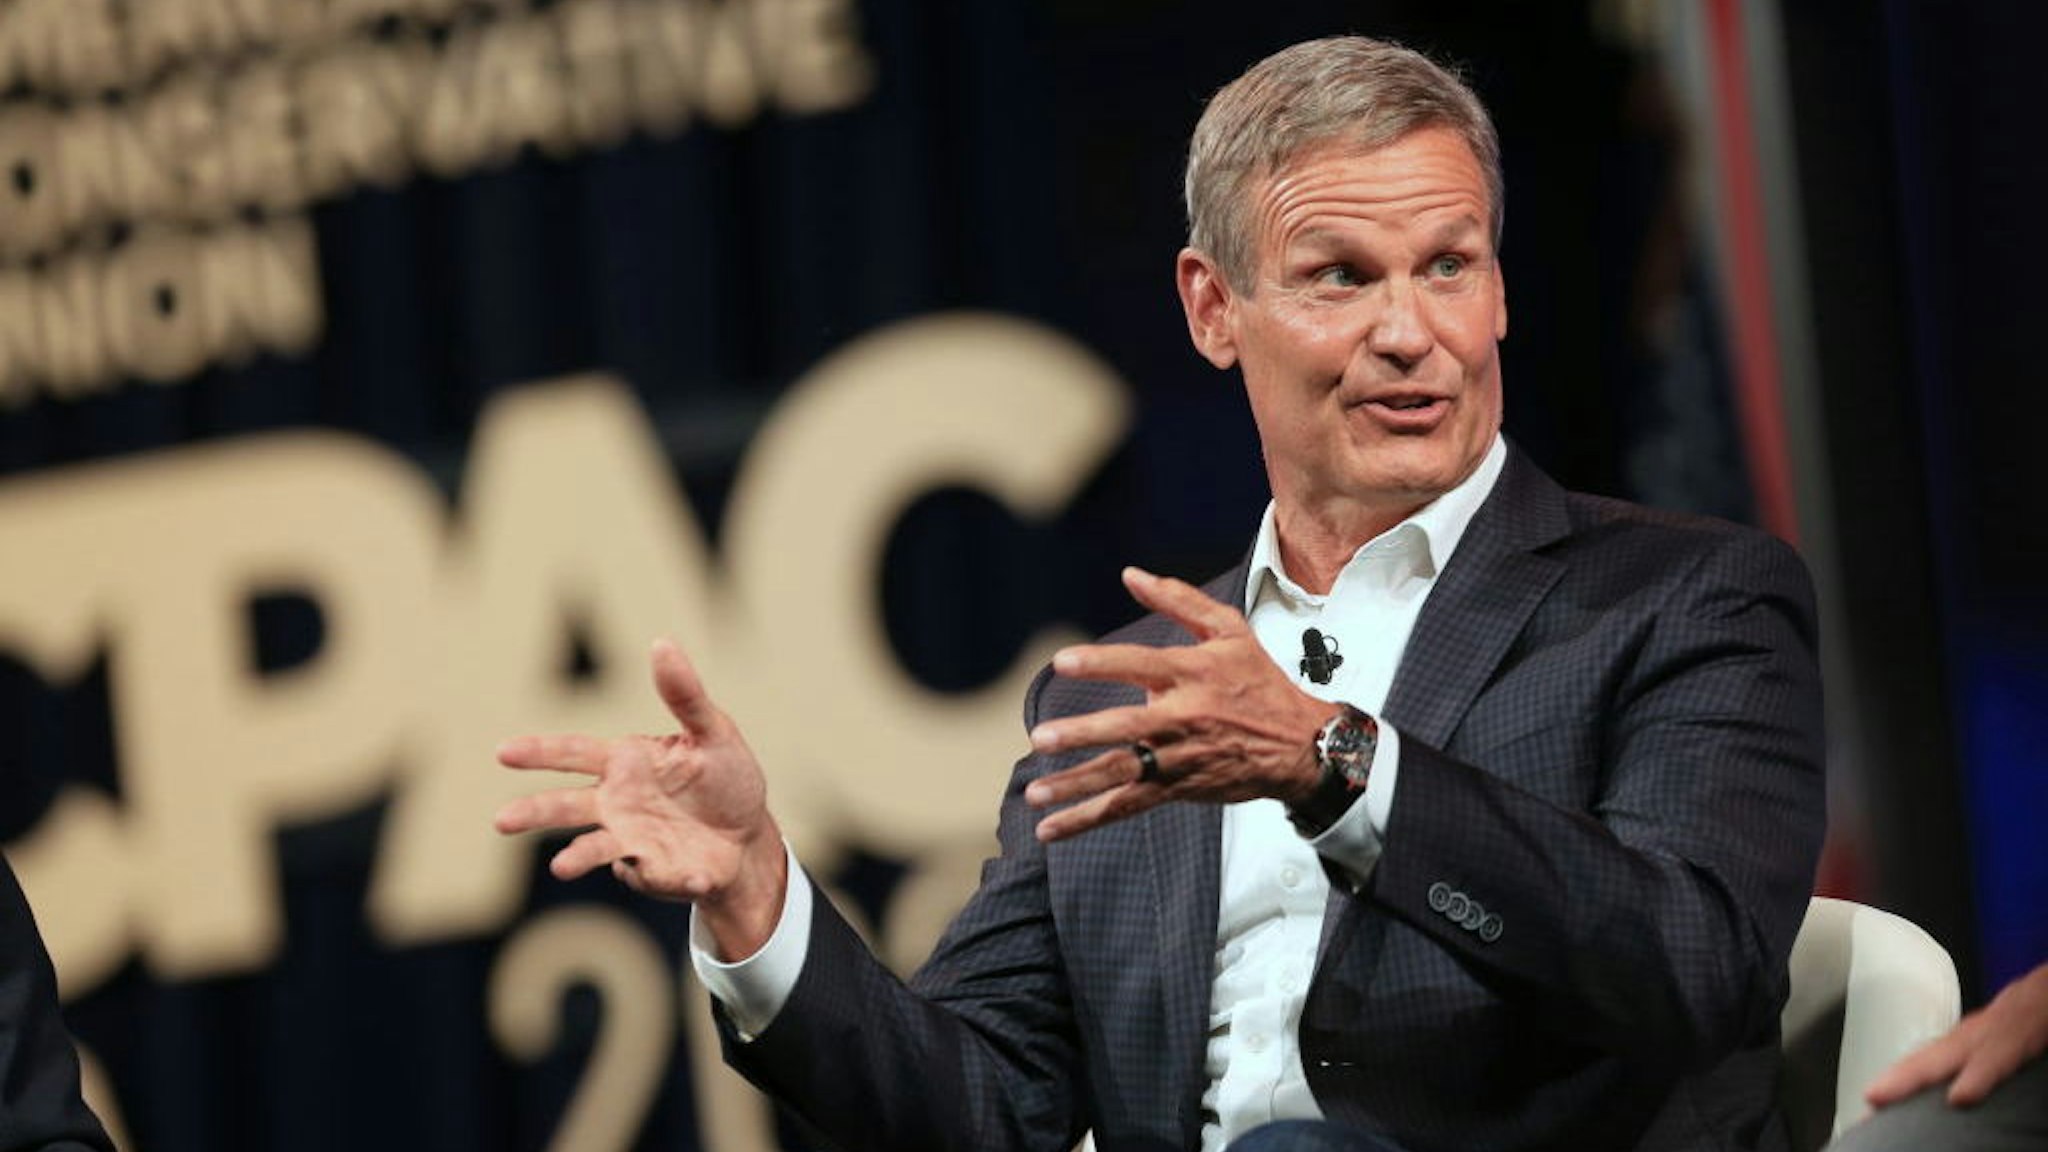 Bill Lee, governor of Tennessee, speaks during the Conservative Political Action Conference (CPAC) in Dallas, Texas, U.S., on Saturday, July 10, 2021. The three-day conference is titled "America UnCanceled." Photographer: Dylan Hollingsworth/Bloomberg